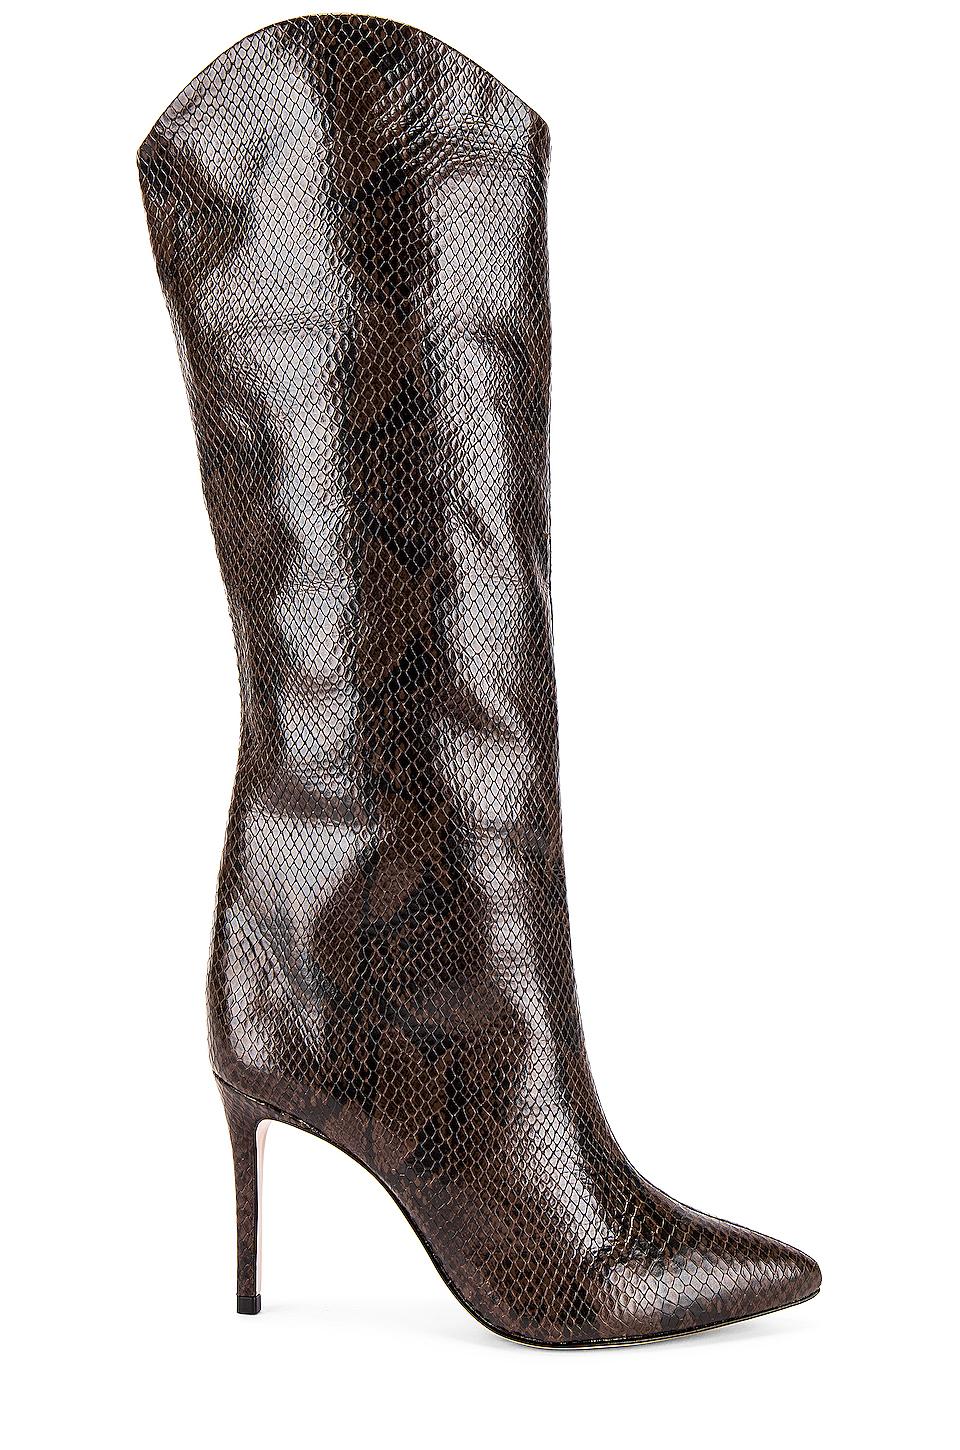 Schutz Leather Maryana Snake Boot in Brown - Lyst